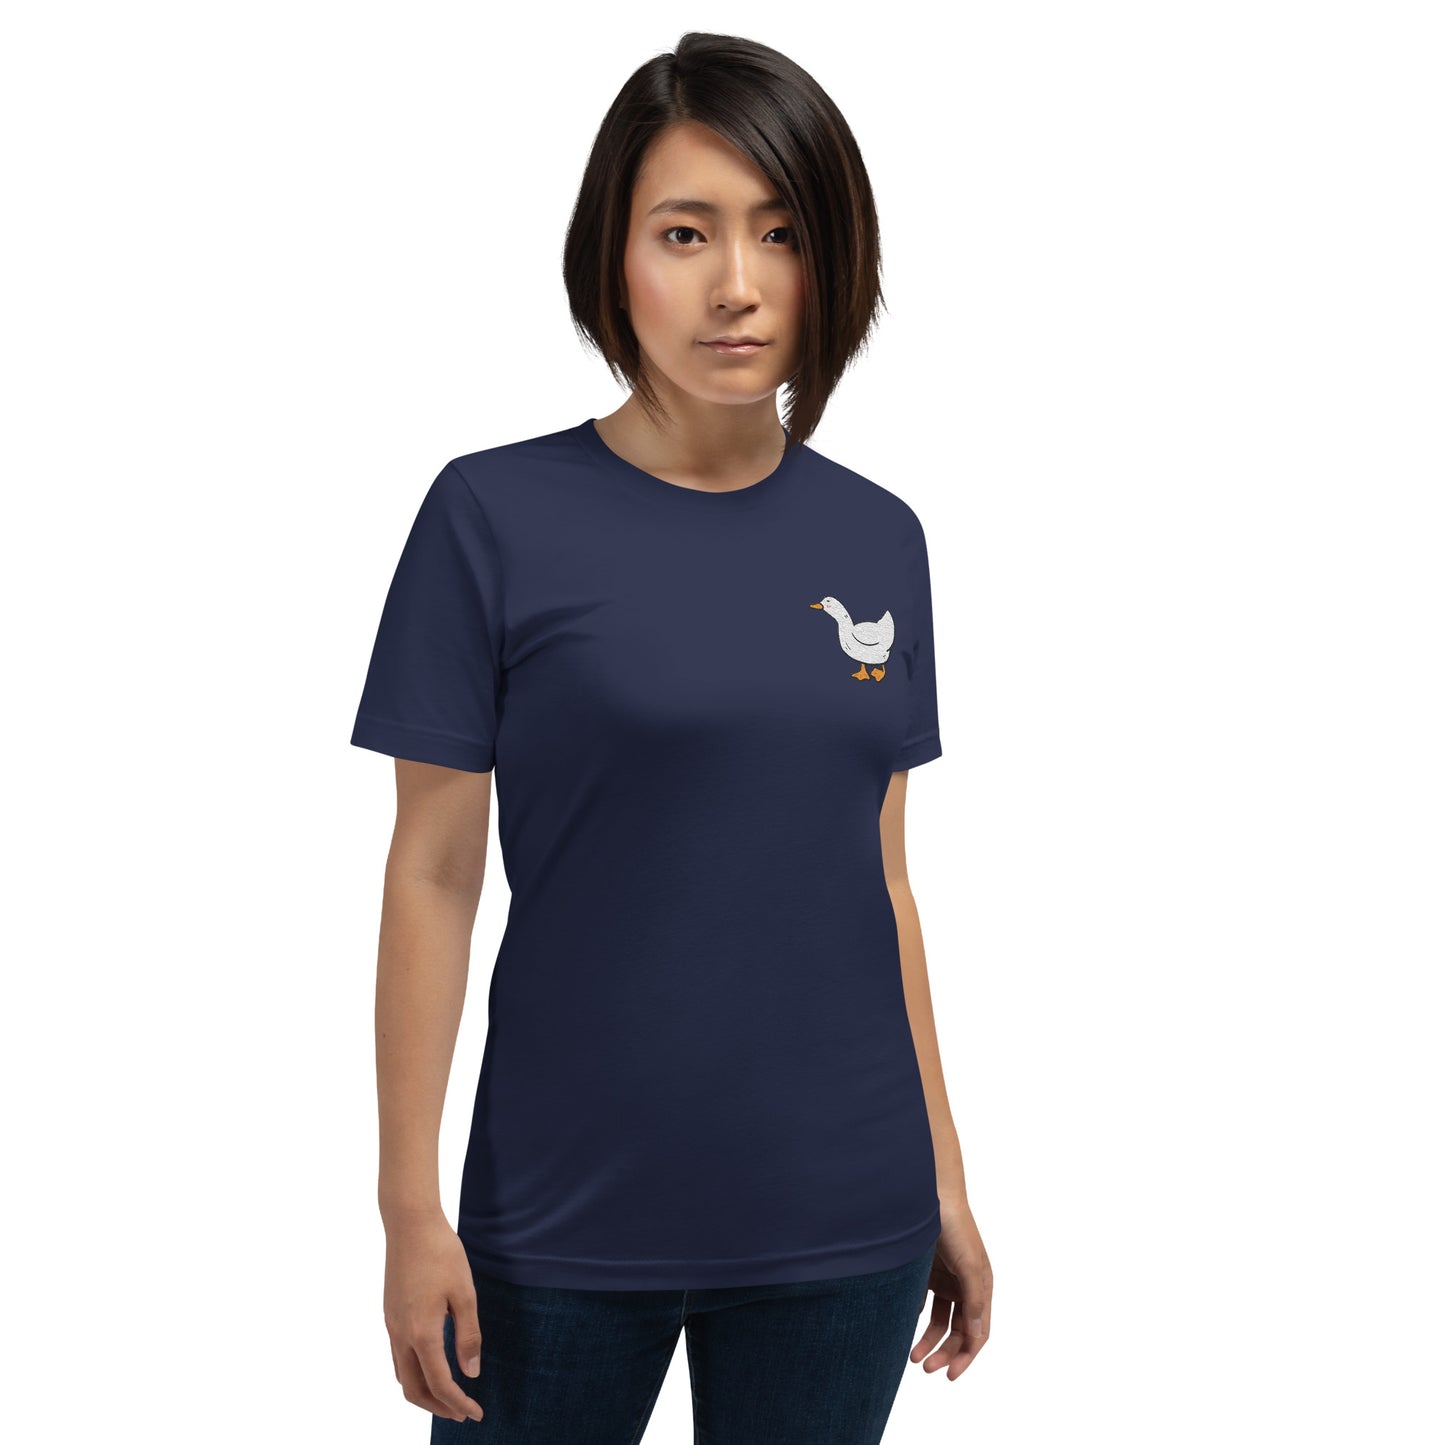 Embroidery White Duck Women's T-Shirt